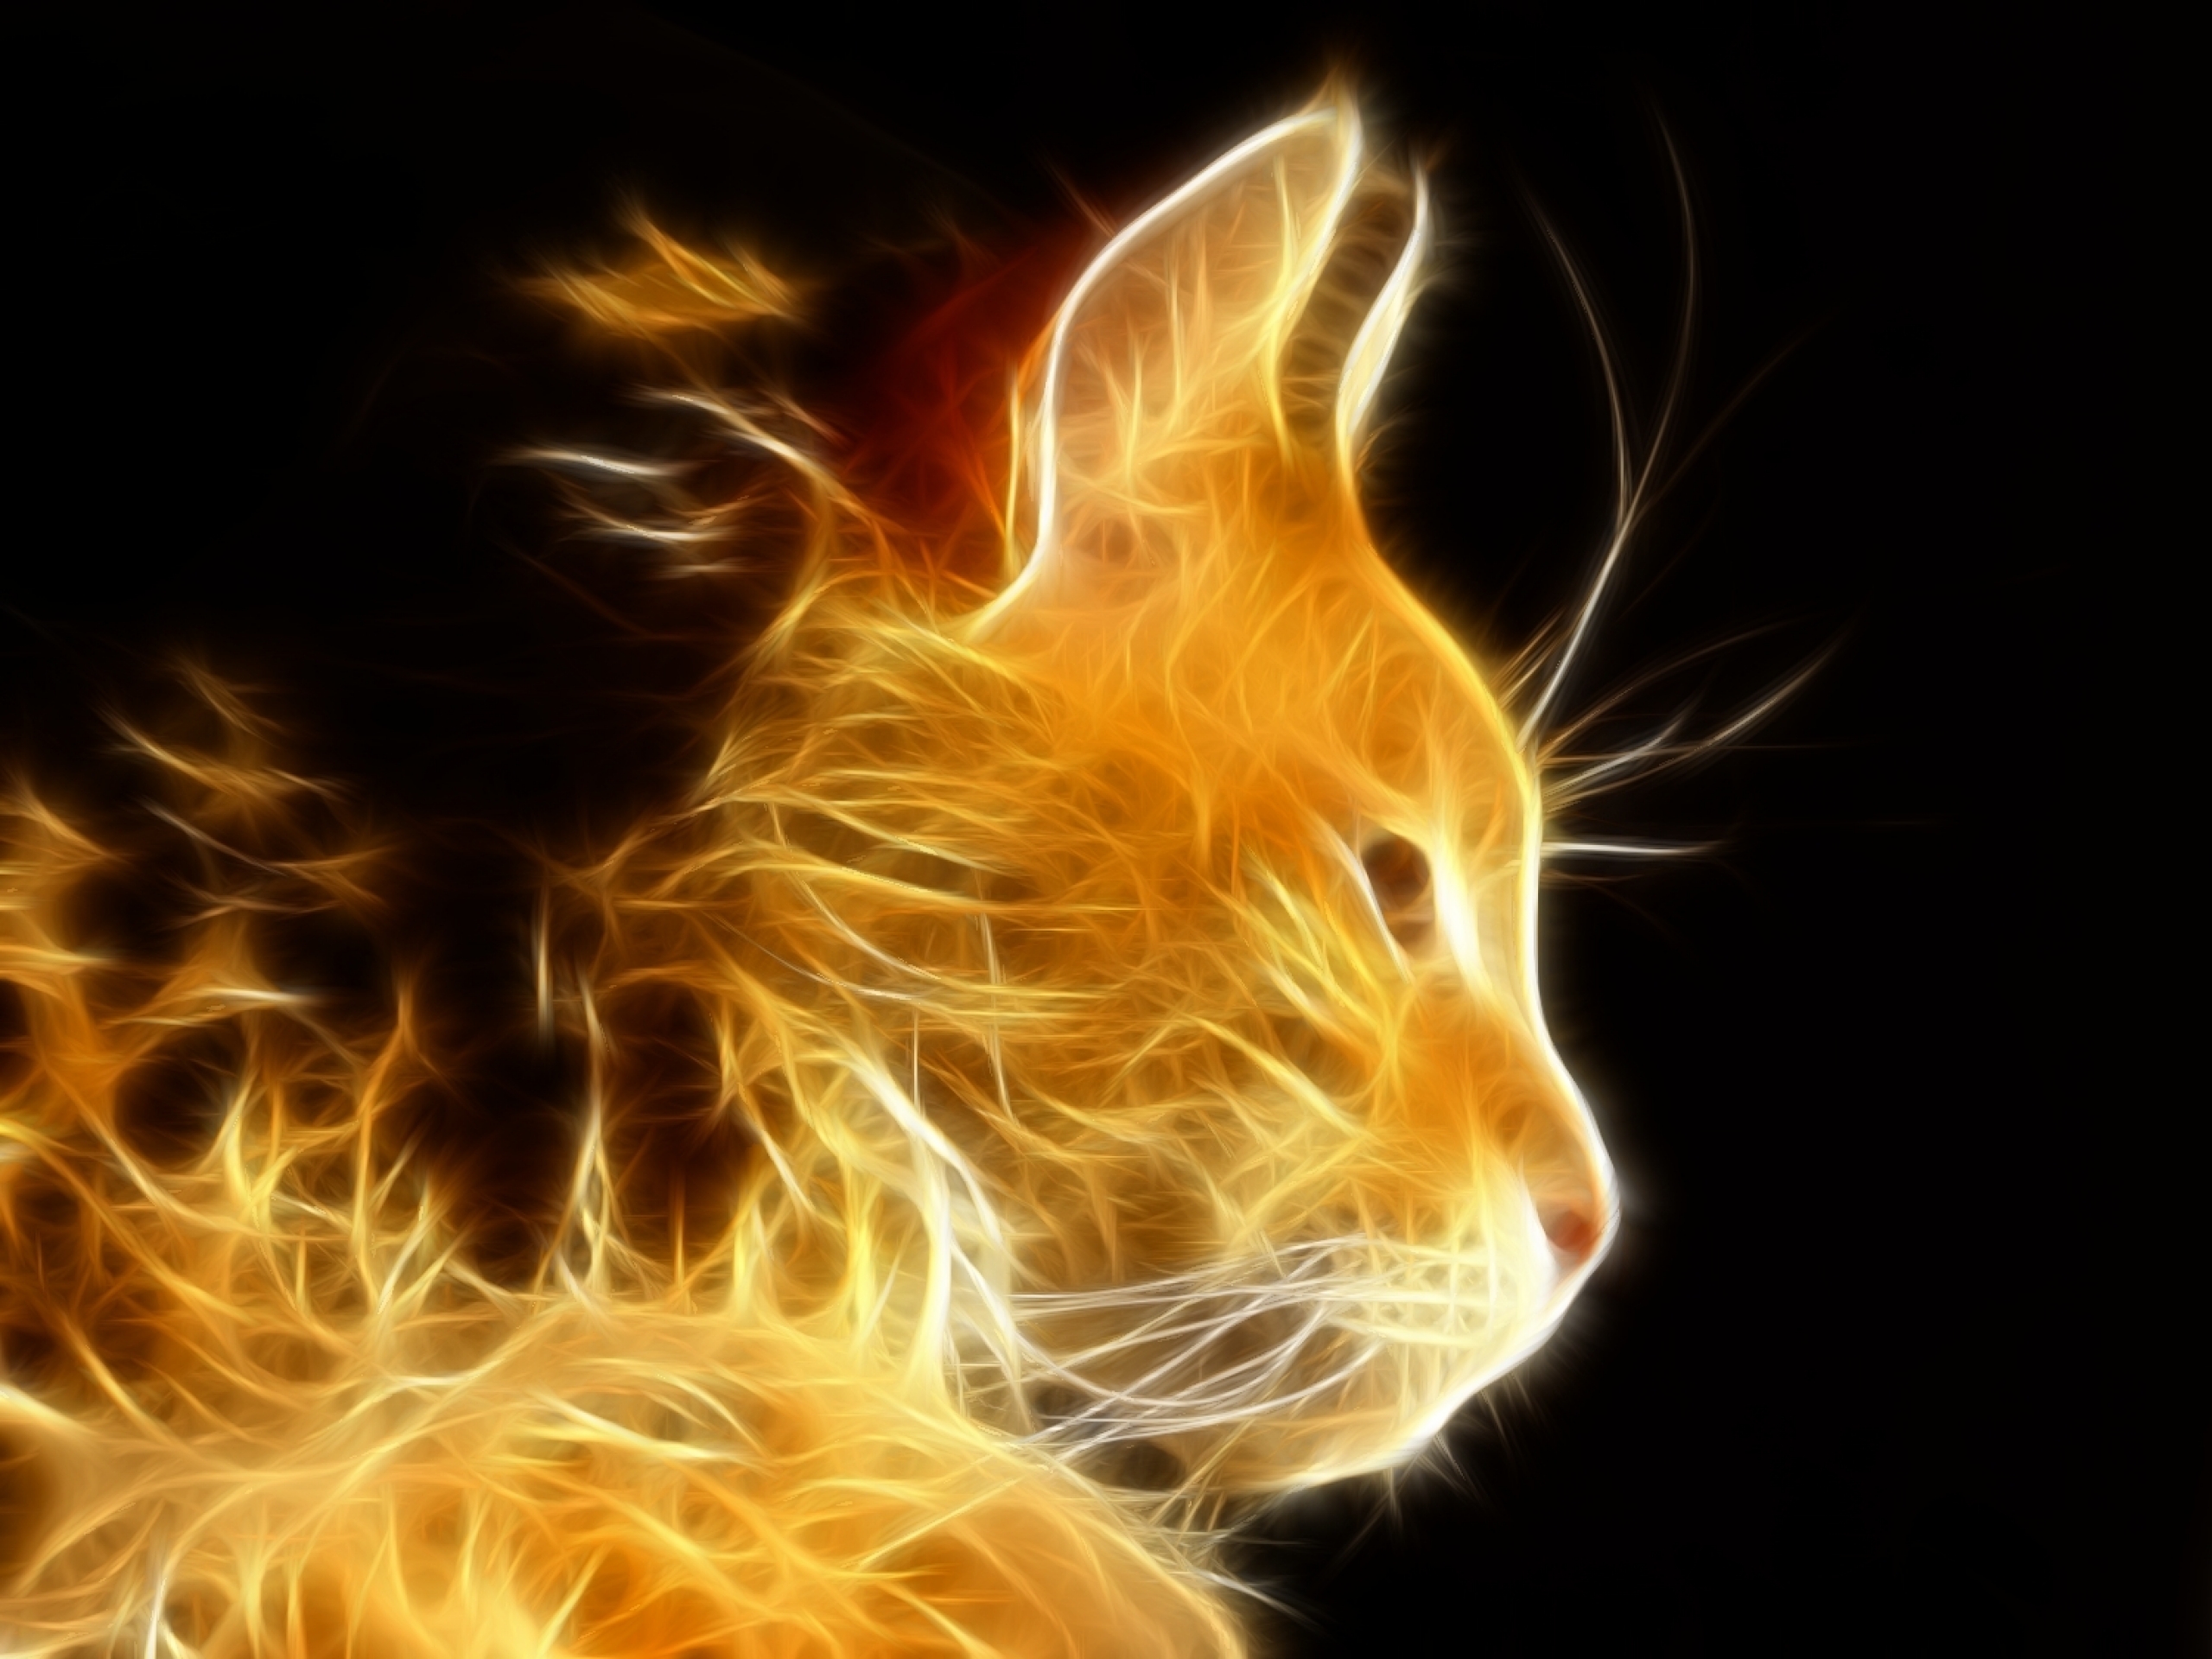 Cool cat backgrounds